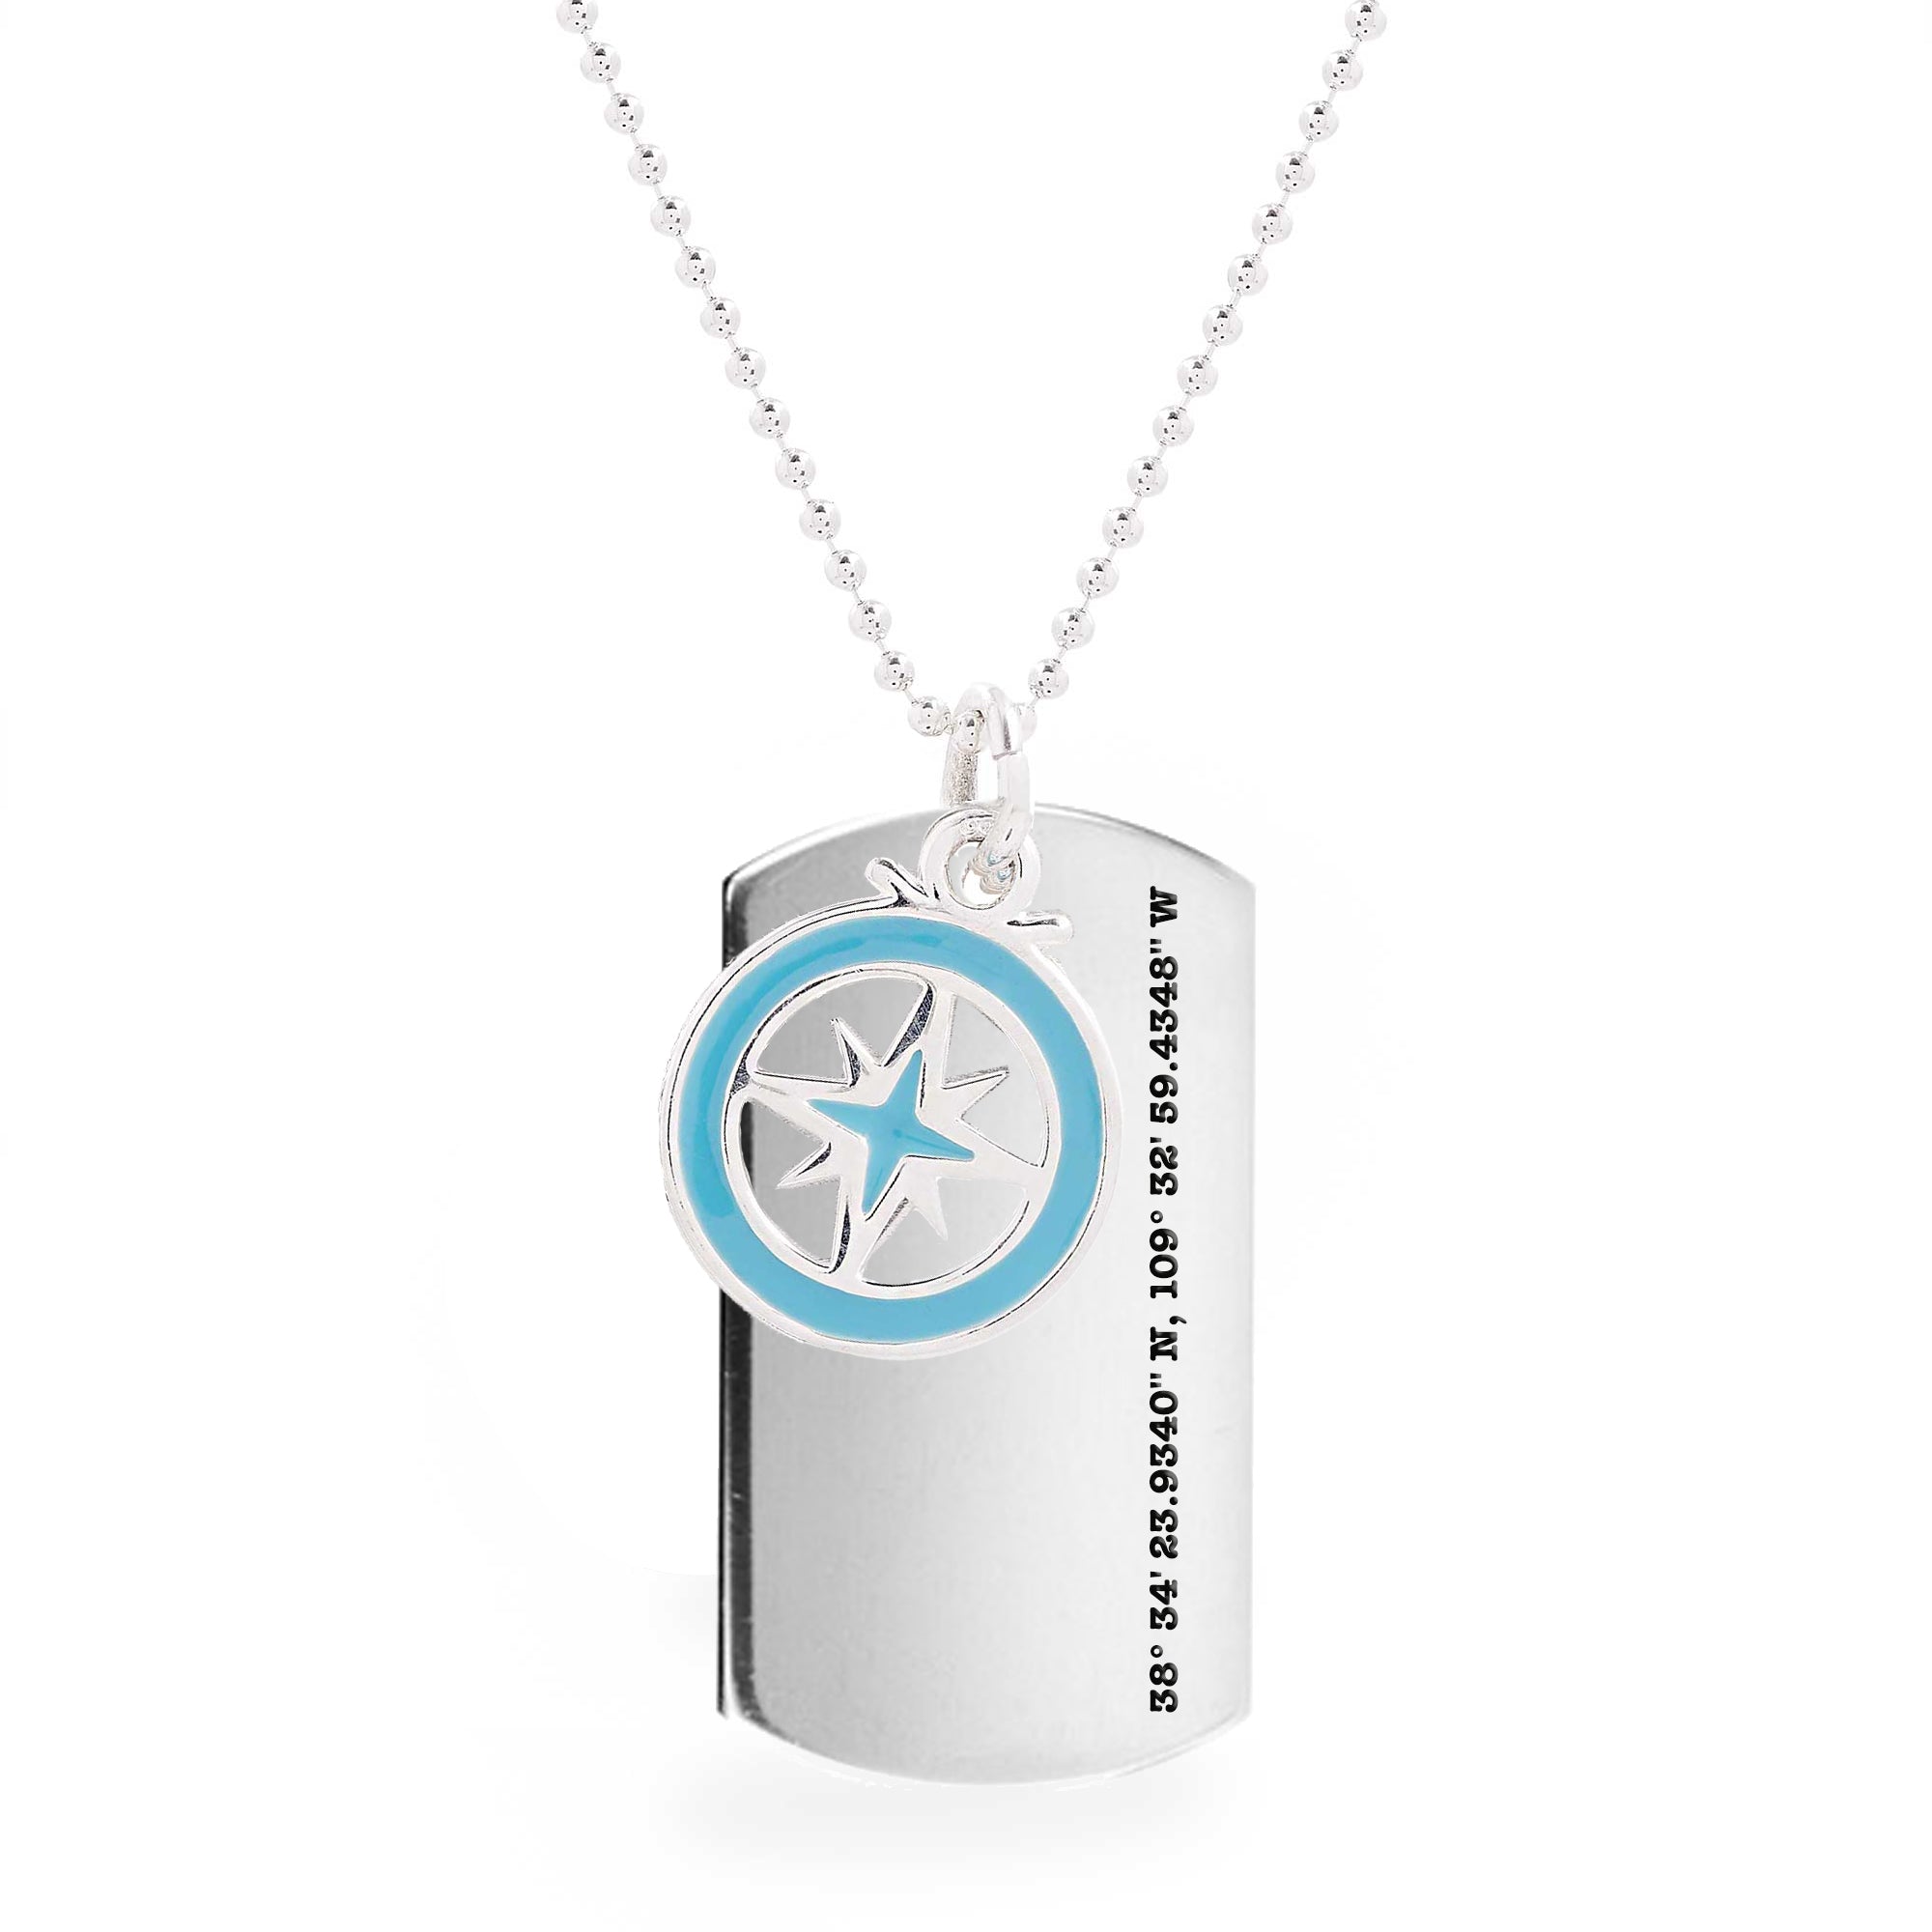 X-L Recycled Silver Dog Tag  Necklace With Enamel Compass